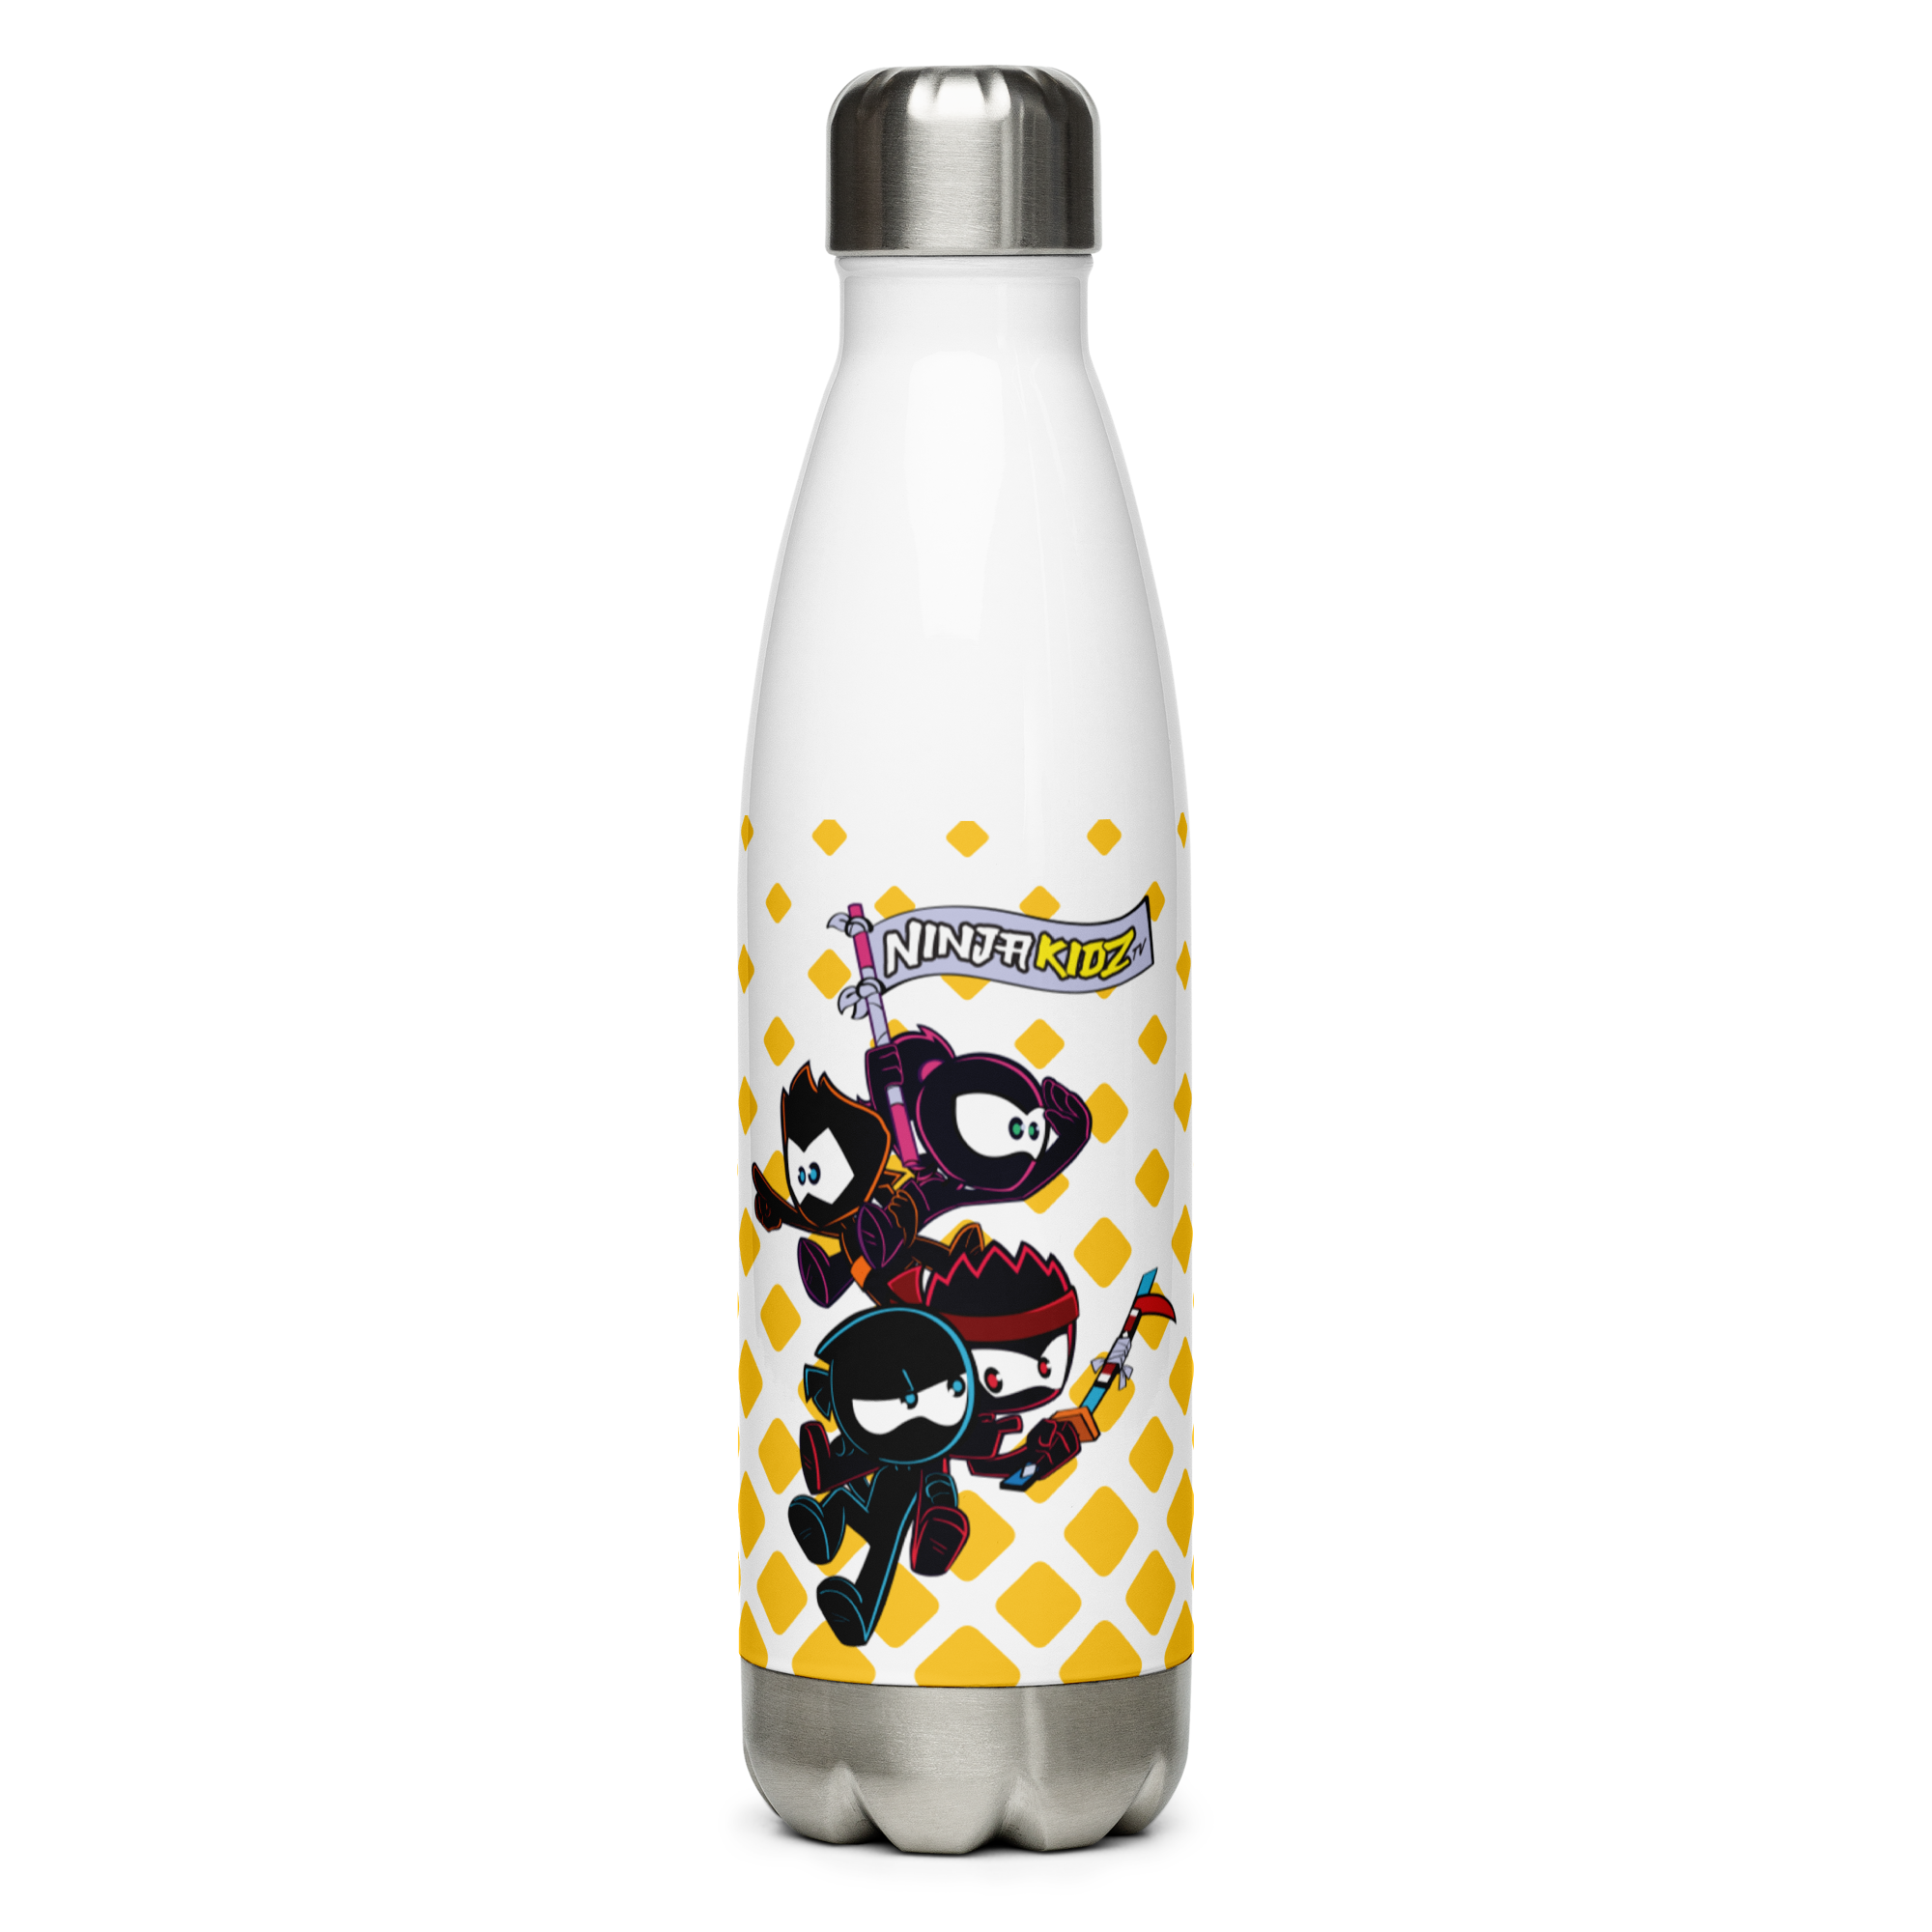 https://cdn.shopify.com/s/files/1/1796/6745/products/stainless-steel-water-bottle-white-17oz-front-62e2d3b5ba811.png?v=1659032509